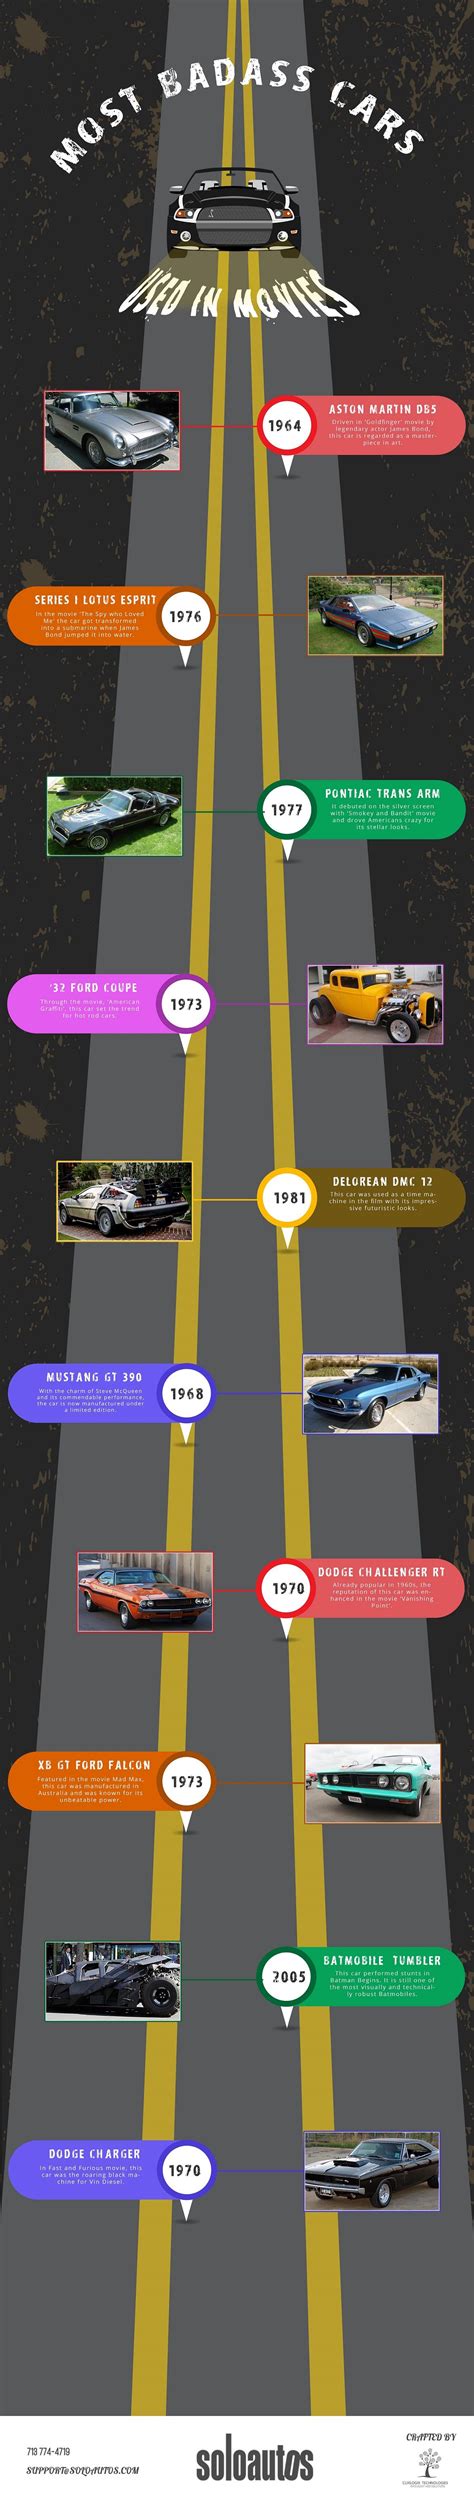 most badass cars used in movies infographic infographic